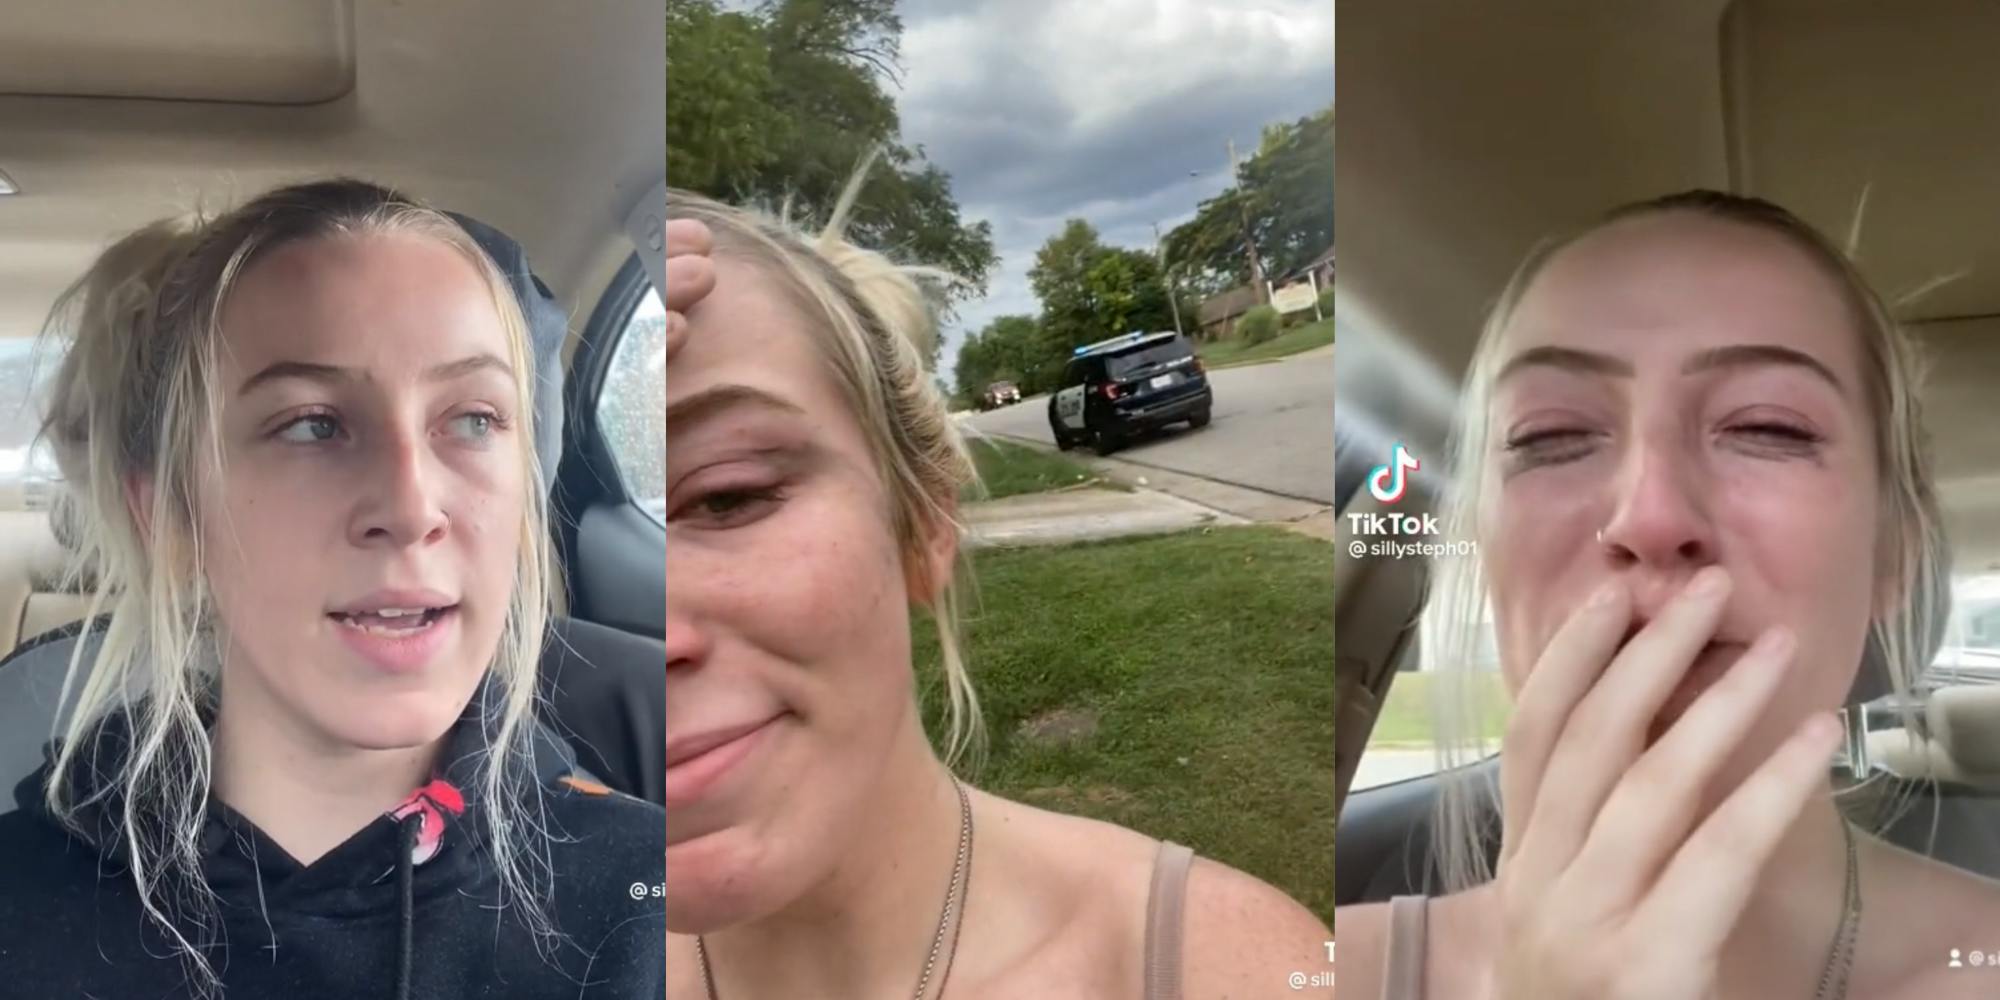 unhoused woman on tiktok shares story of being scammed by fake housing listing on facebook through banking app chime